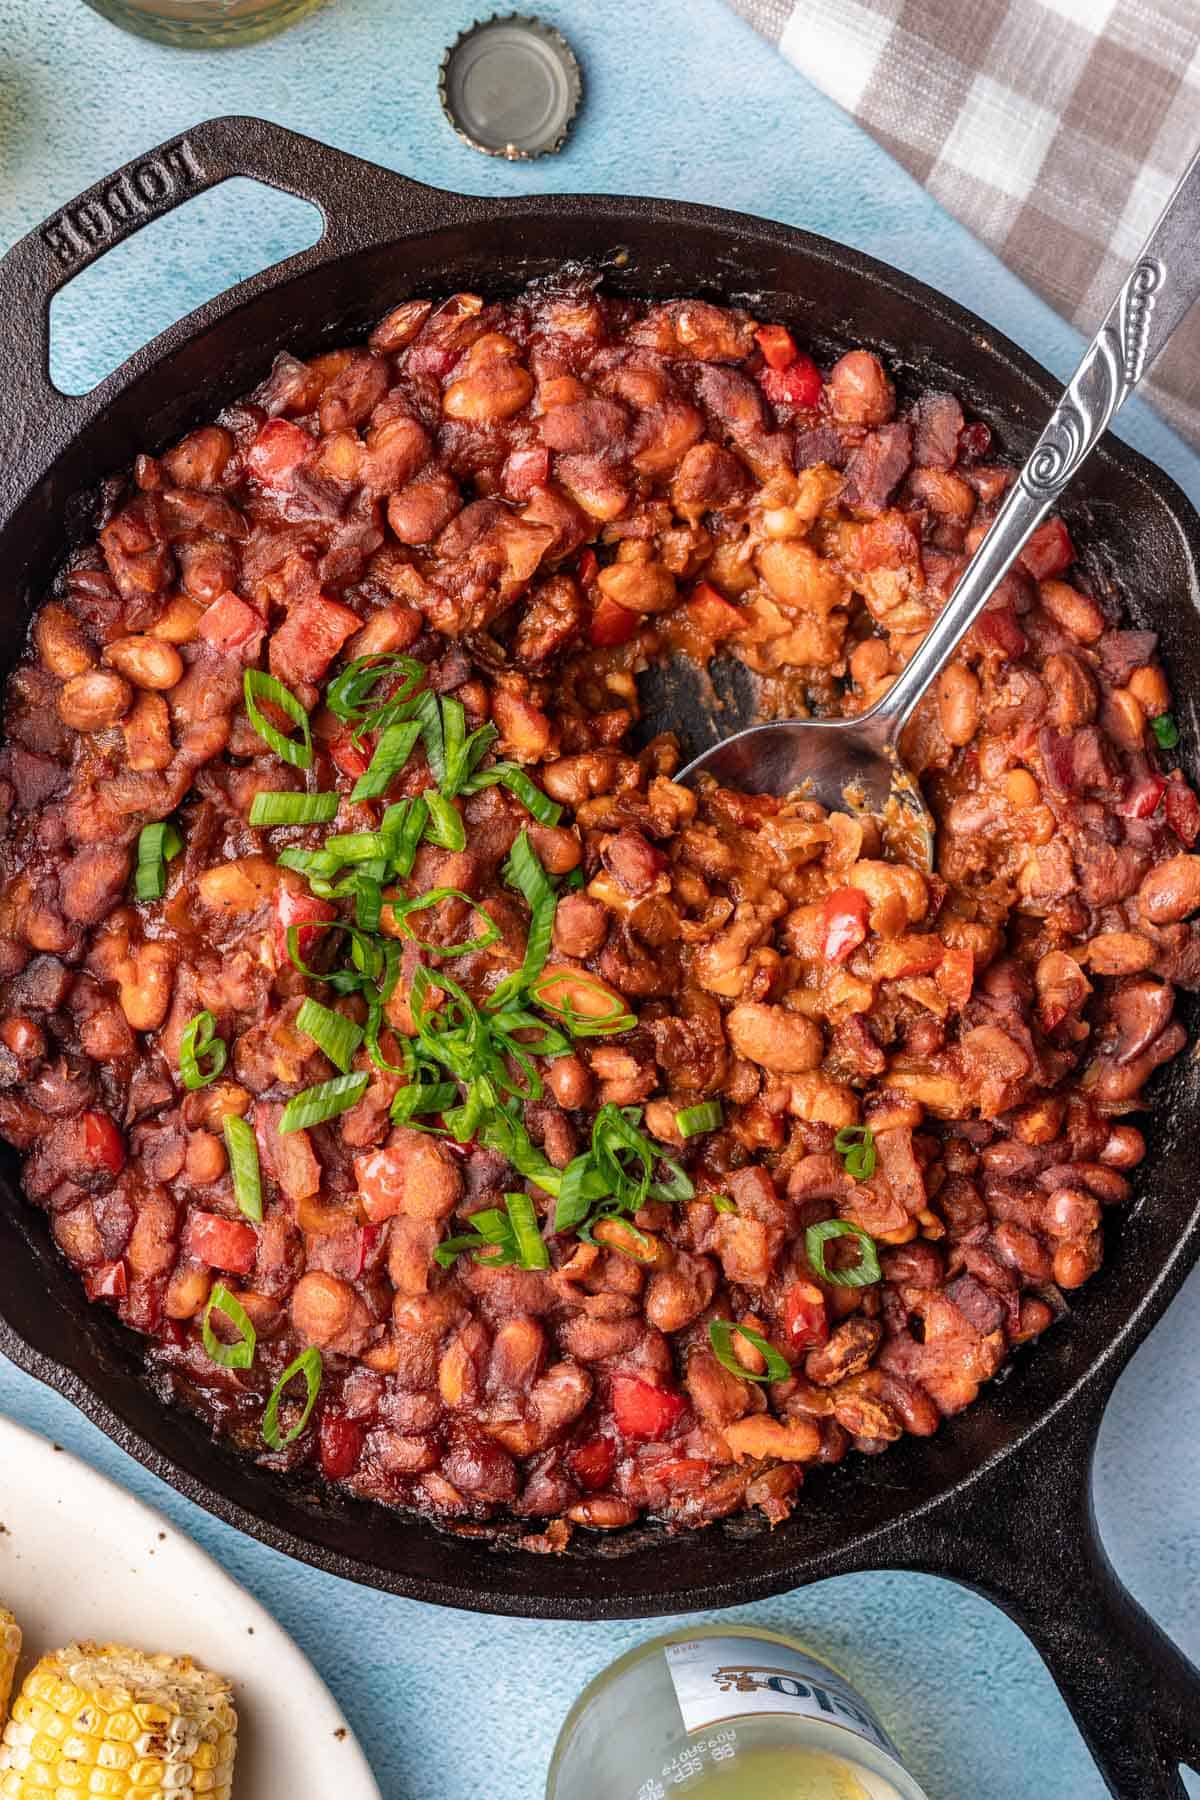 Smoked baked beans garnished with green onions in a cast iron skillet.